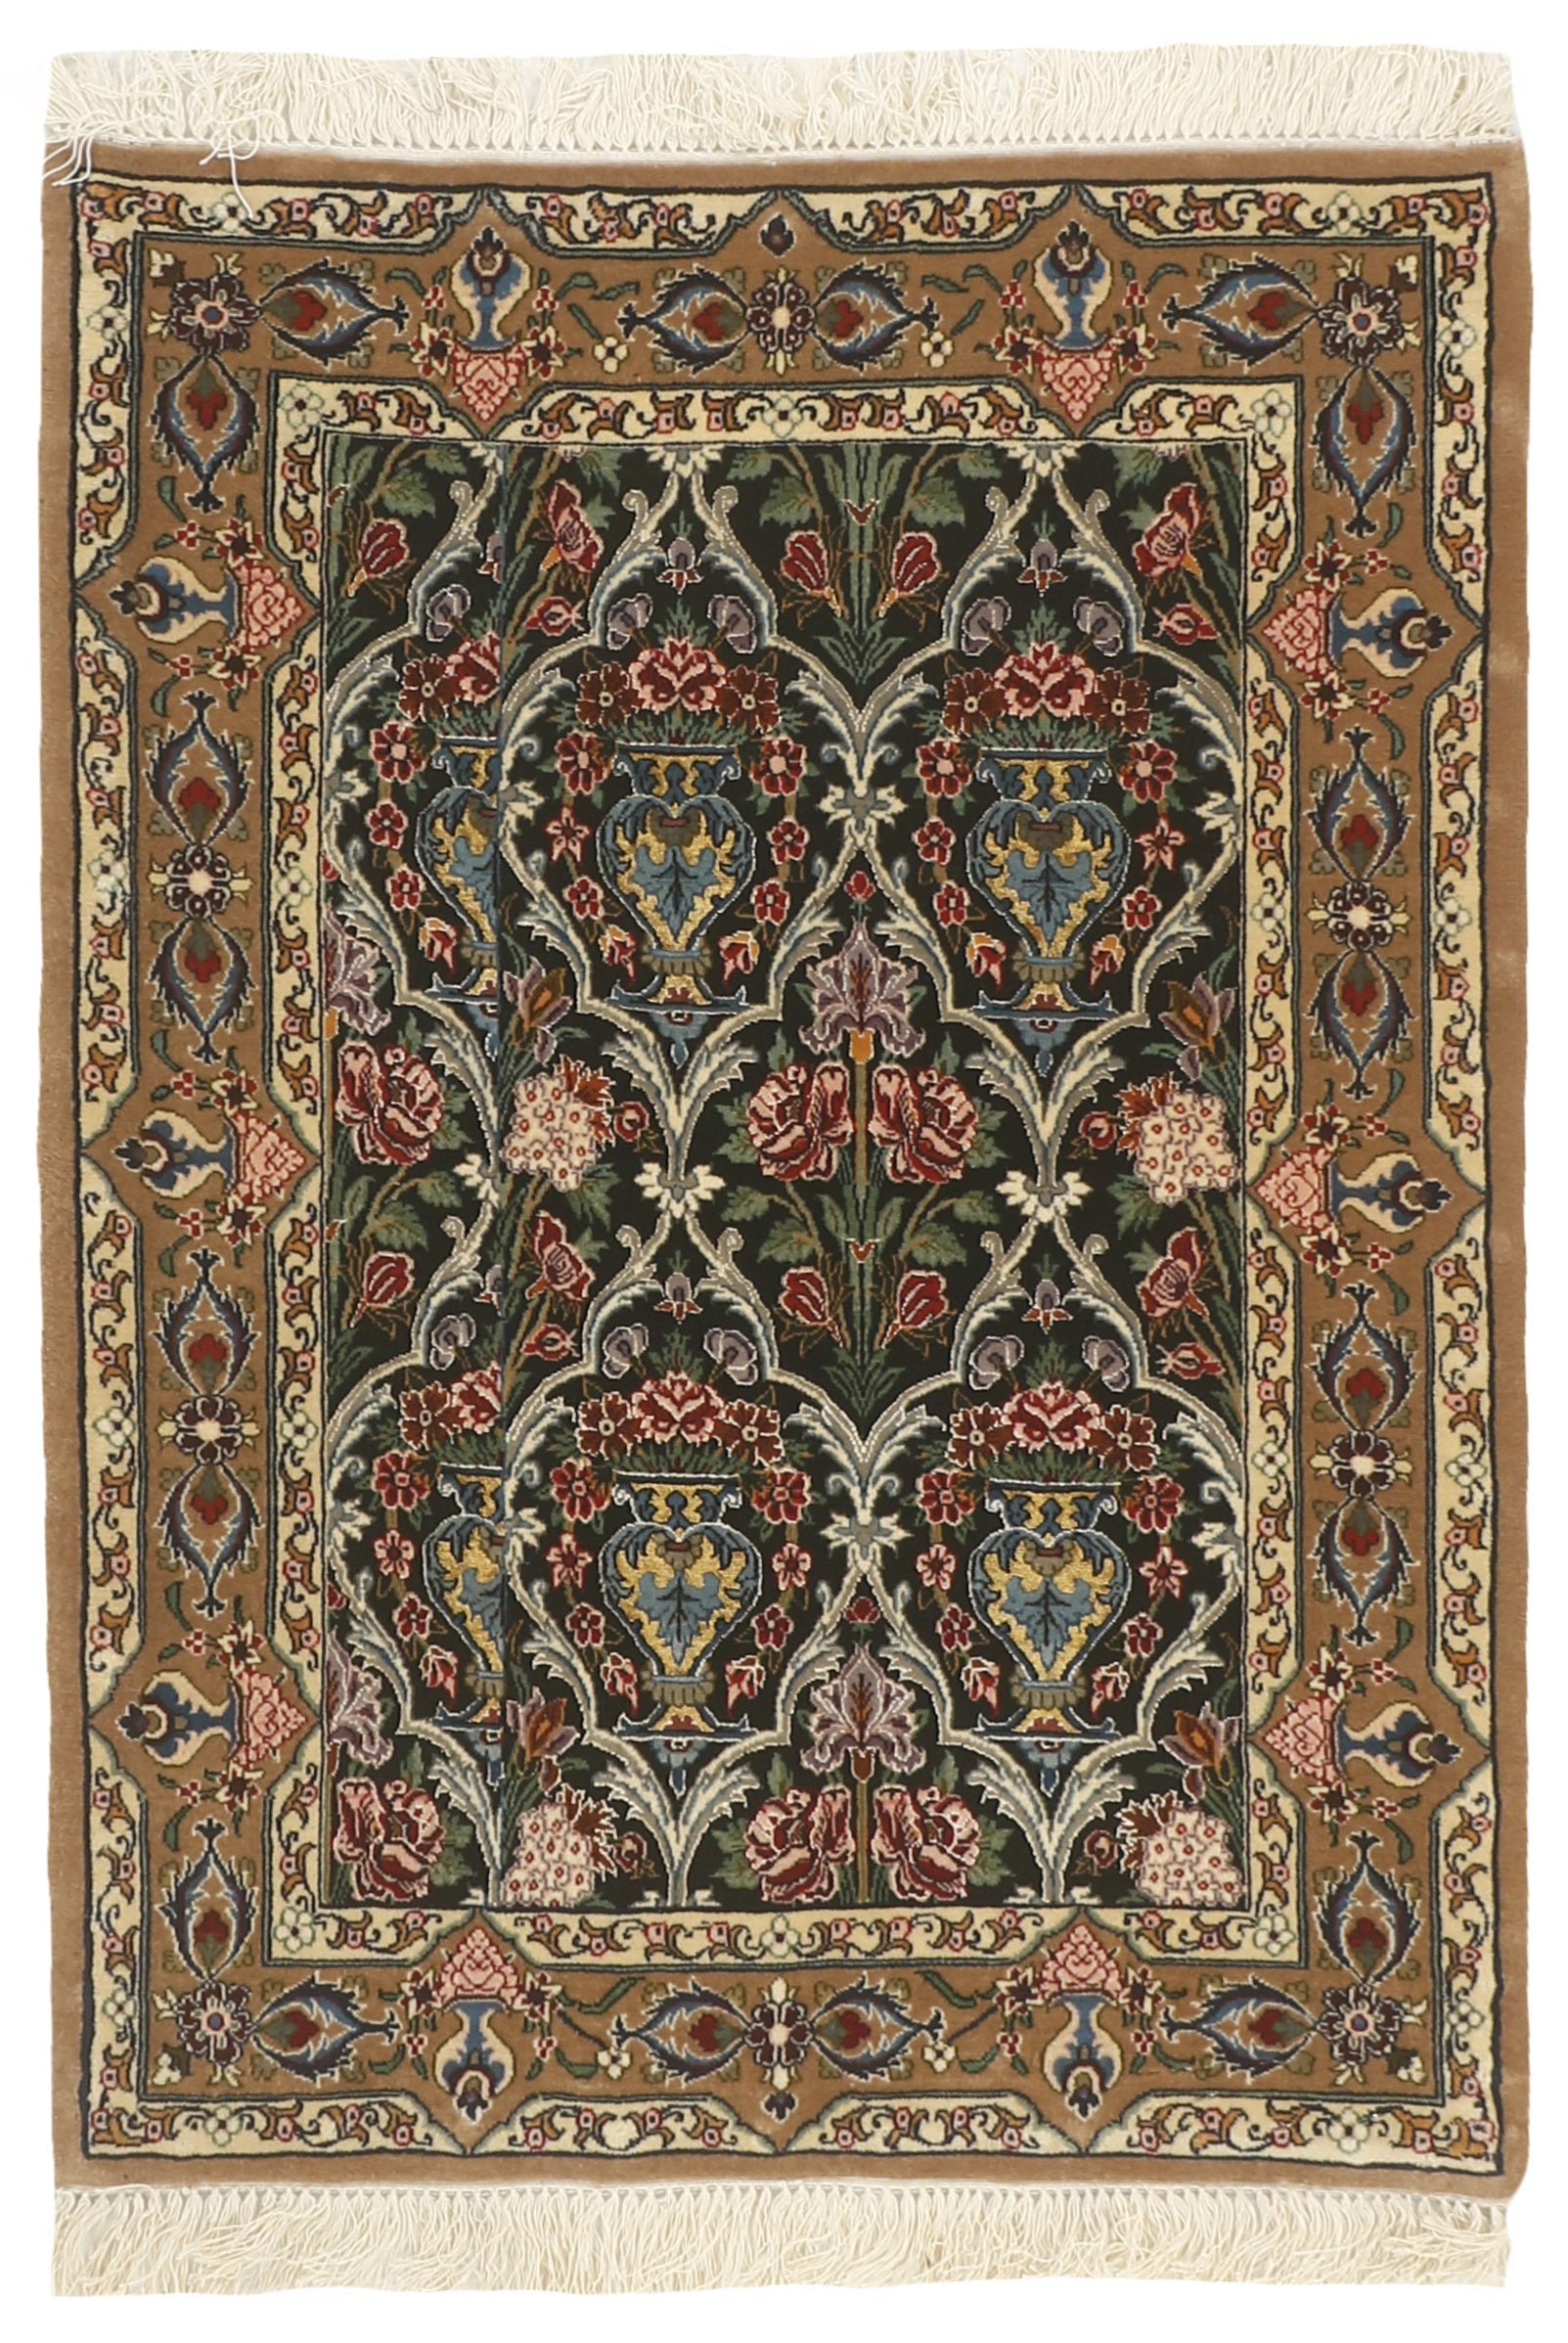 Authentic persian rug with traditional pattern in red, blue, green, beige, brown and black